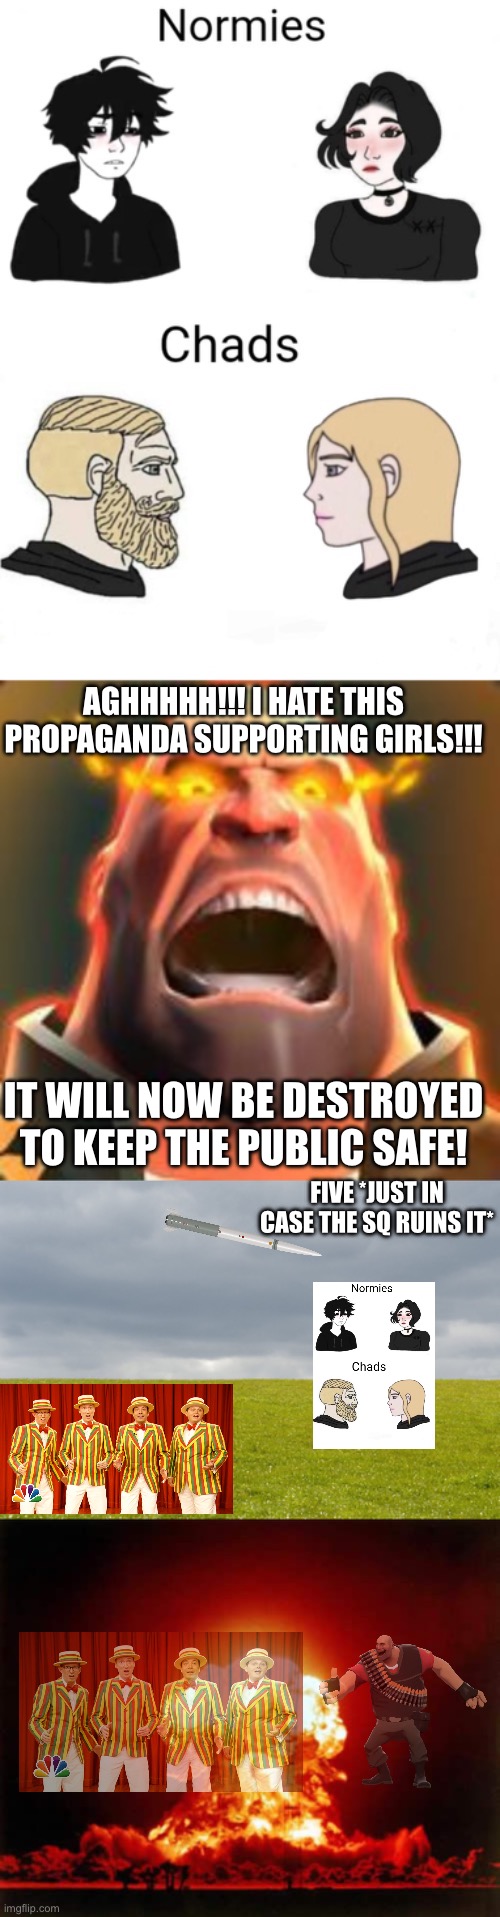 A new quartet… | AGHHHHH!!! I HATE THIS PROPAGANDA SUPPORTING GIRLS!!! IT WILL NOW BE DESTROYED TO KEEP THE PUBLIC SAFE! FIVE *JUST IN CASE THE SQ RUINS IT* | image tagged in chads vs normies,angry heavy,empty field,memes,nuclear explosion,jimmy fallon barbershop quartet | made w/ Imgflip meme maker